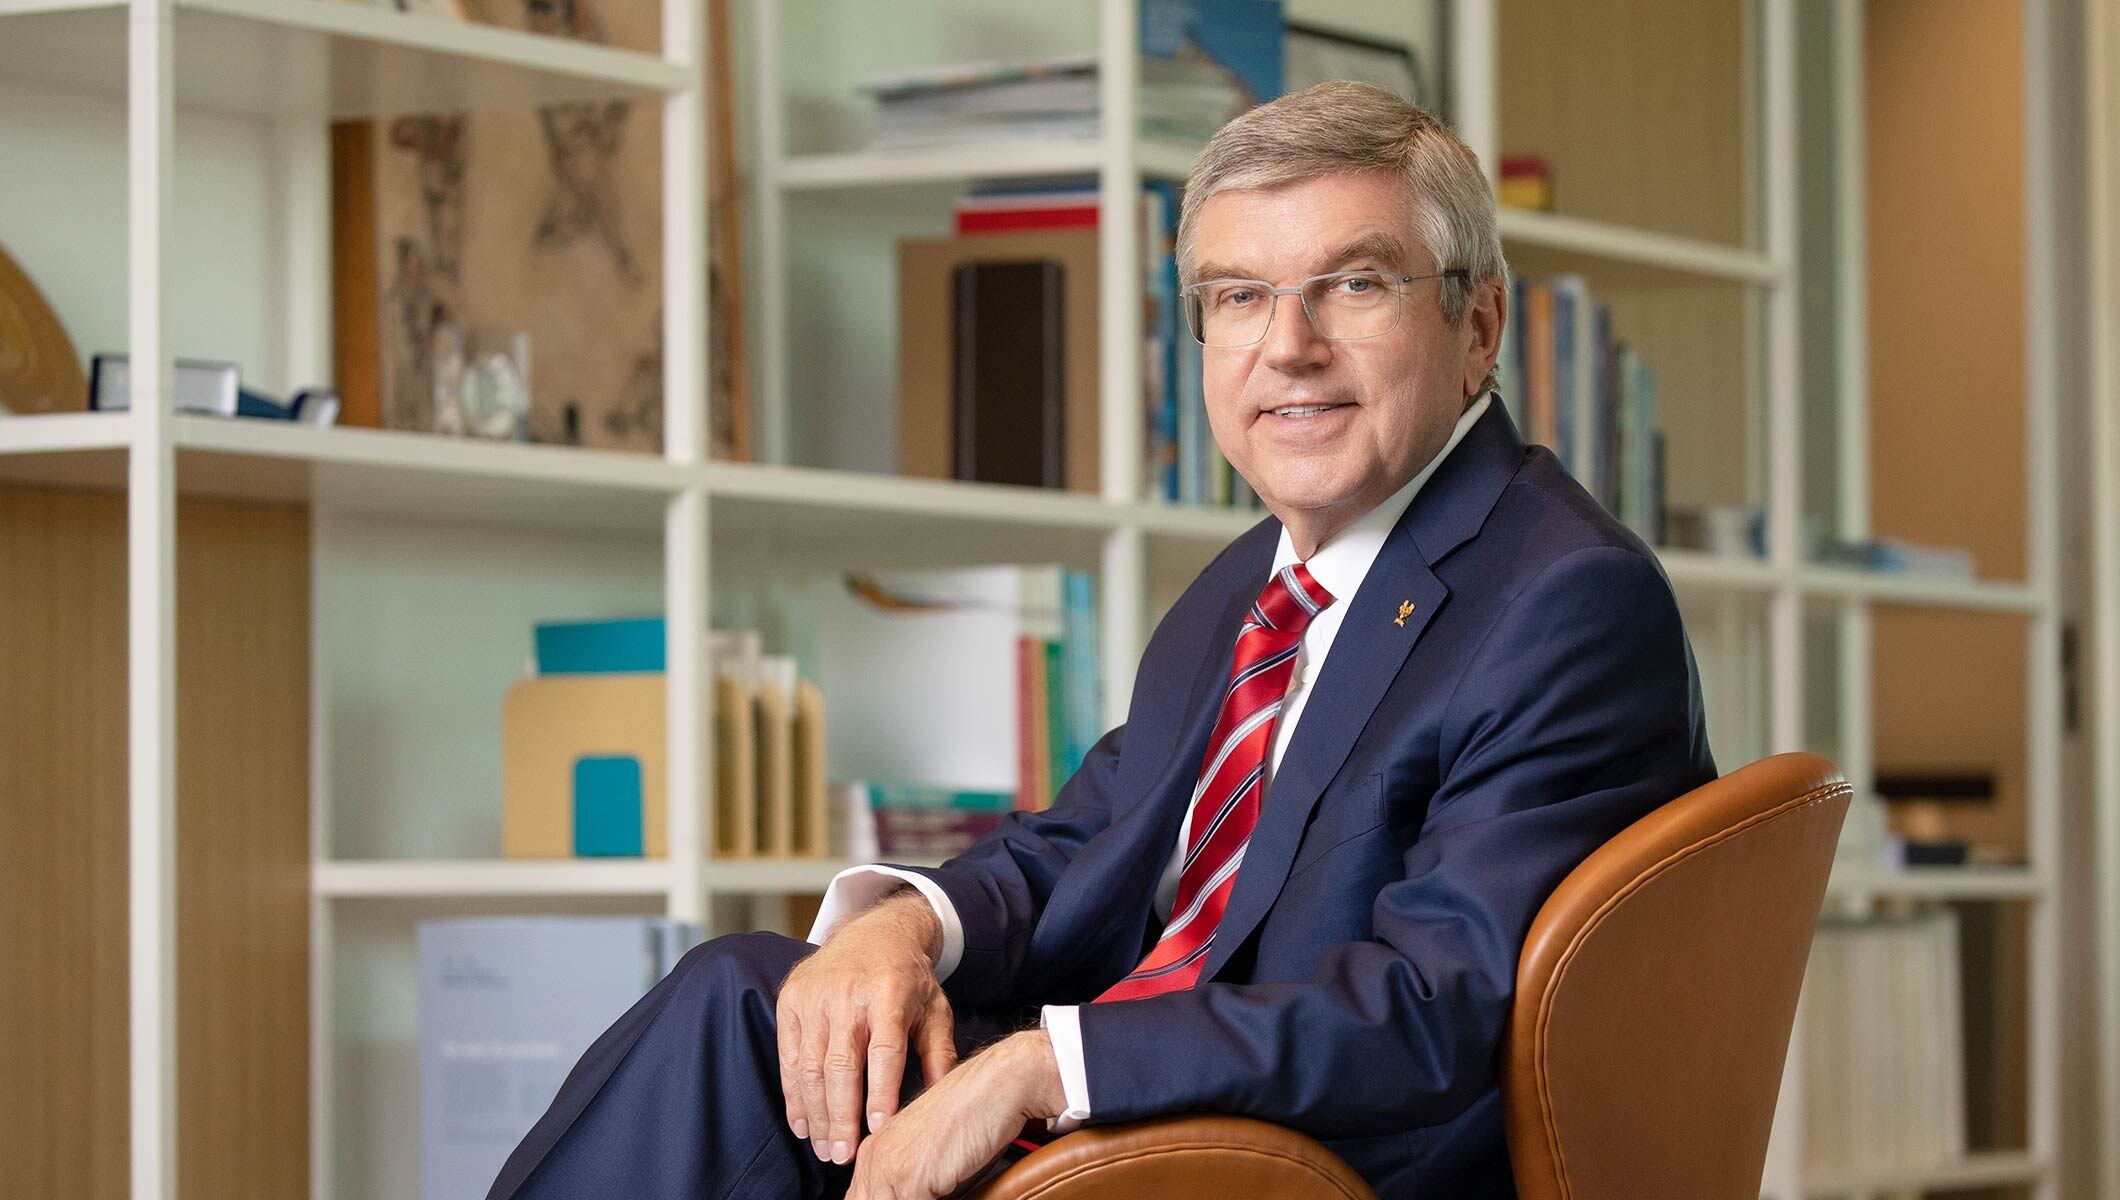 Difficult times call for strong leadership and Thomas Bach is delivering